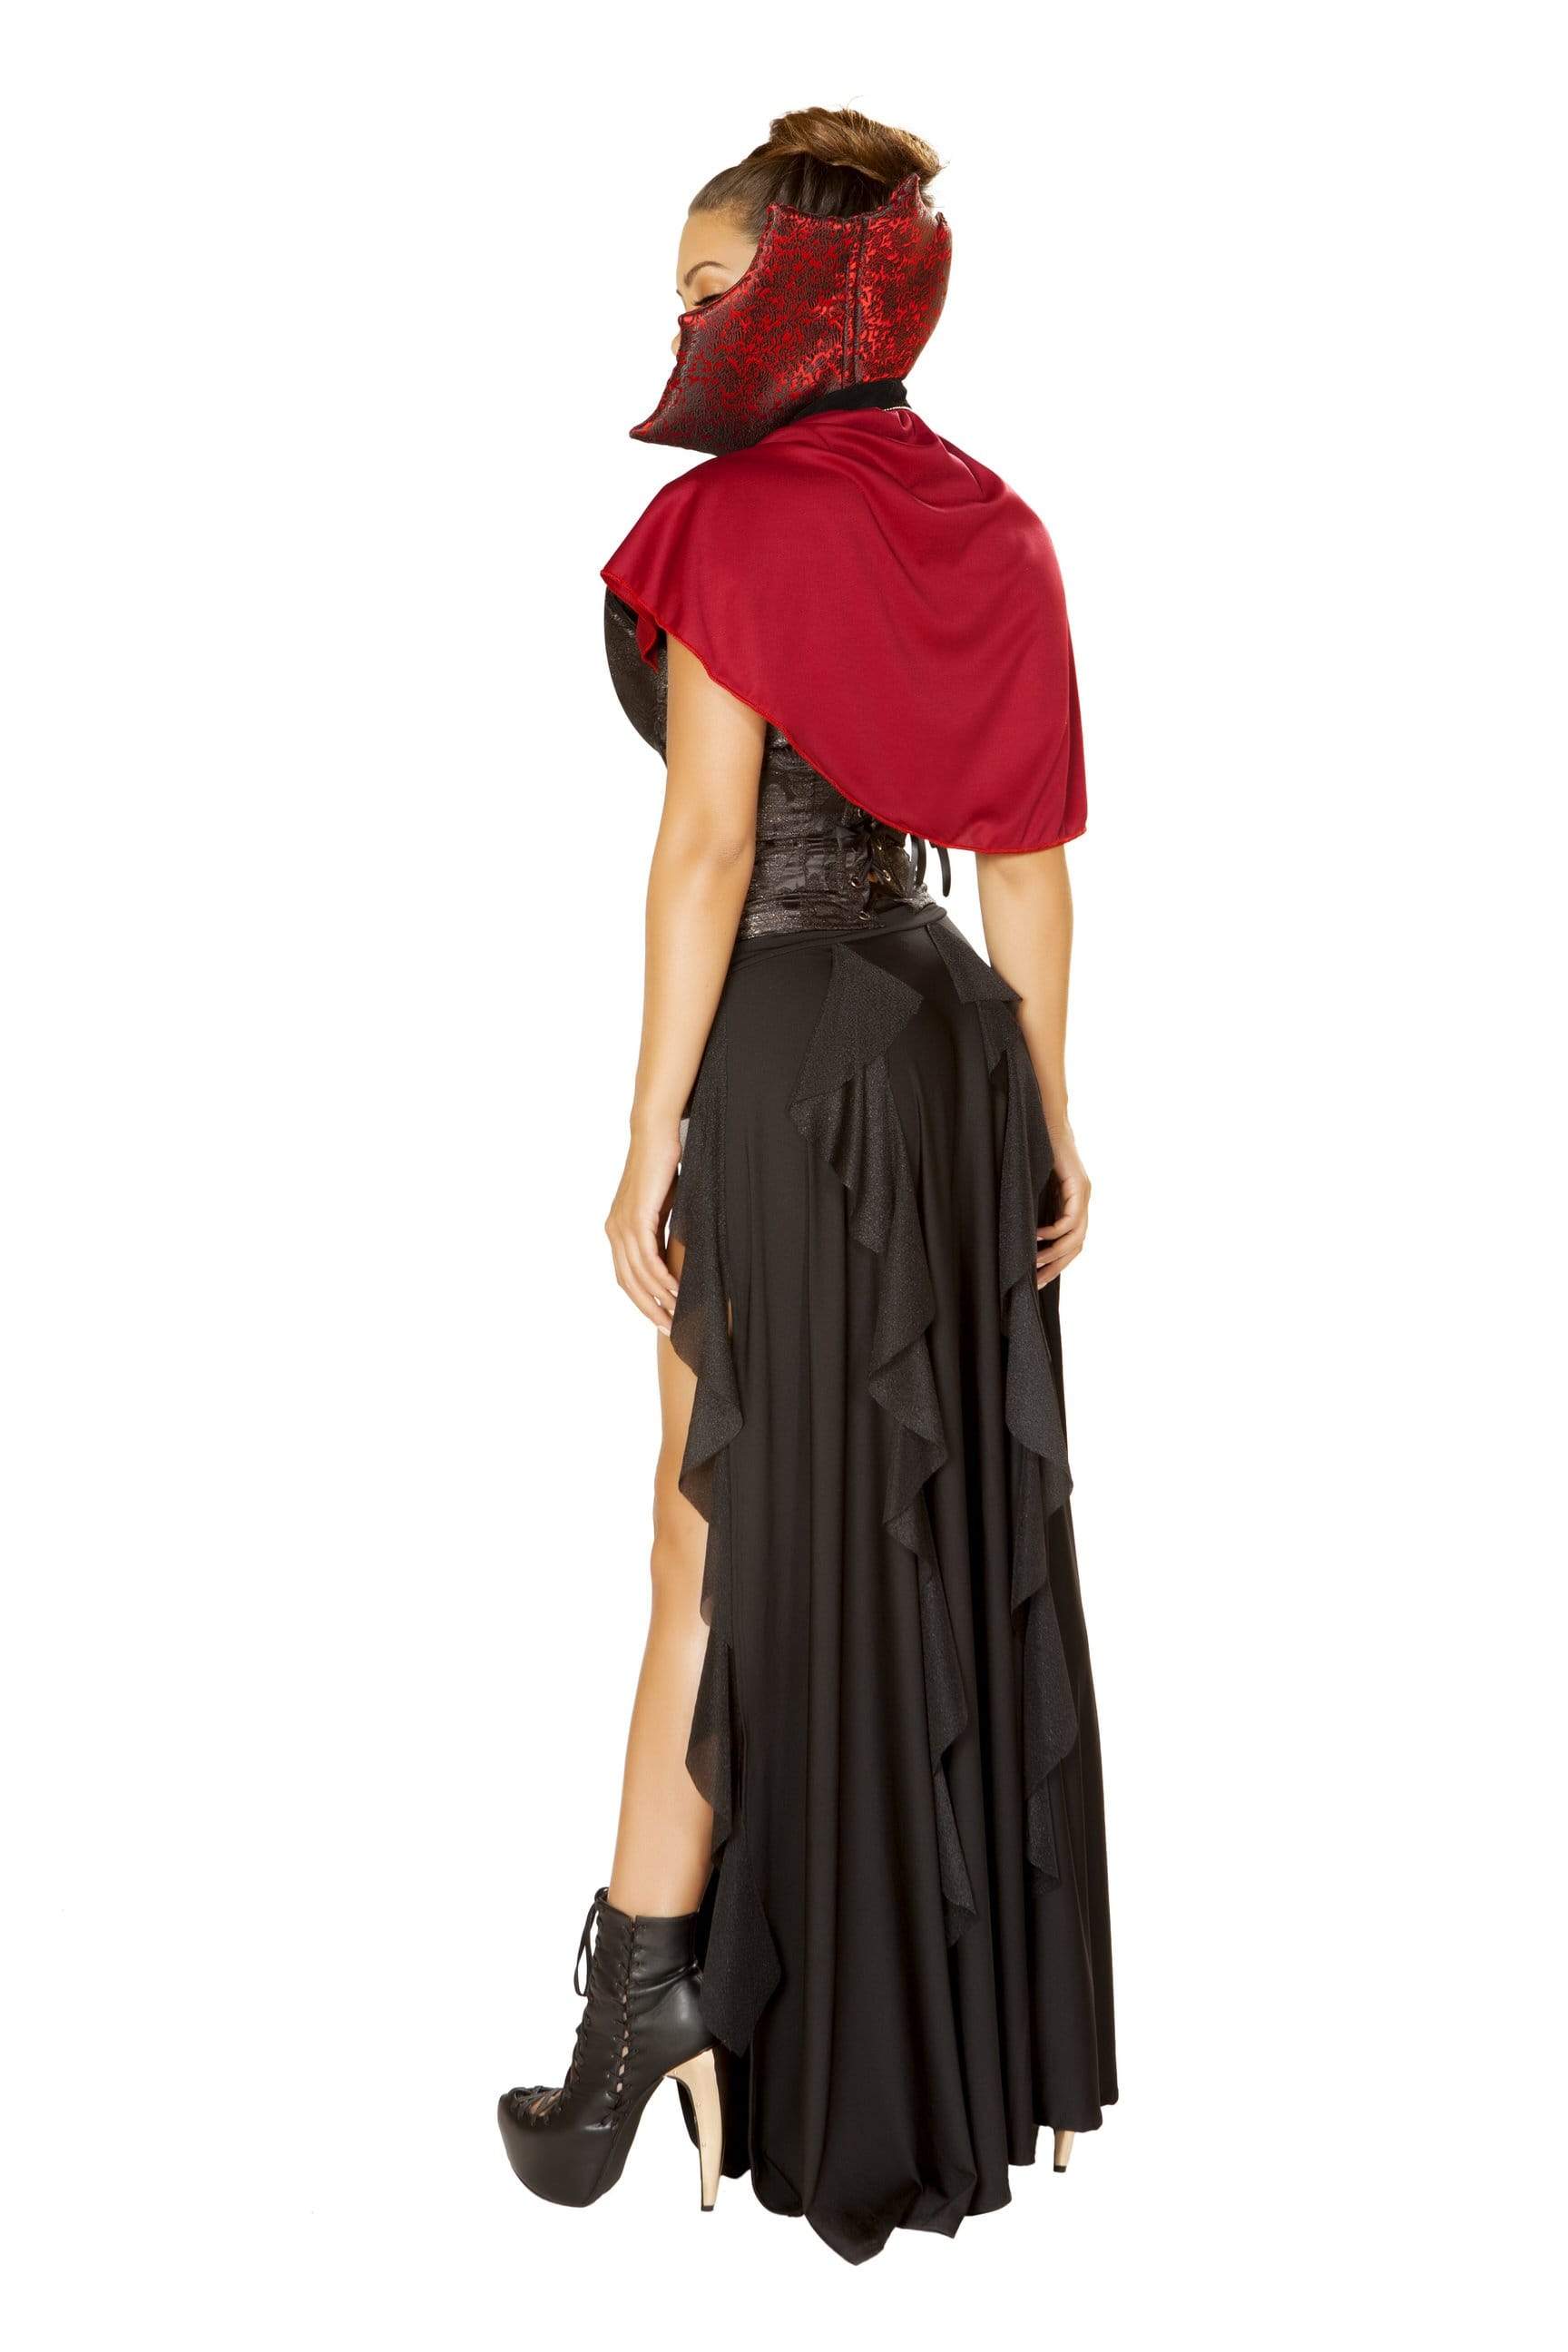 Roma Small / Black 3pc Blood Lusting Vampire SHC-4864-S-R Apparel & Accessories > Costumes & Accessories > Costumes